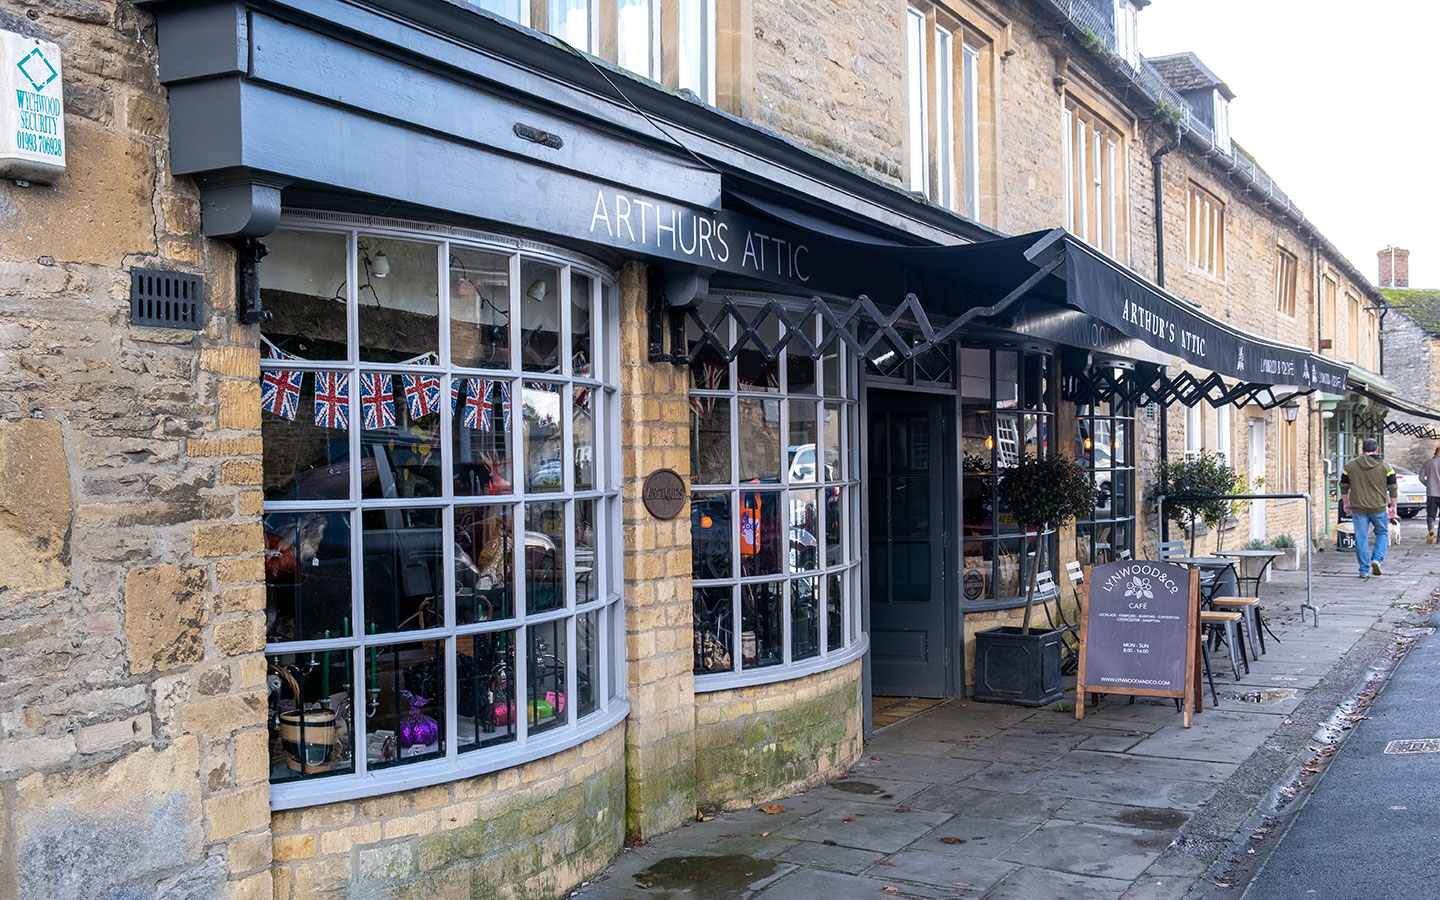 Arthur's Attic and Lynwood & Co shops and cafes in Bampton Oxfordshire